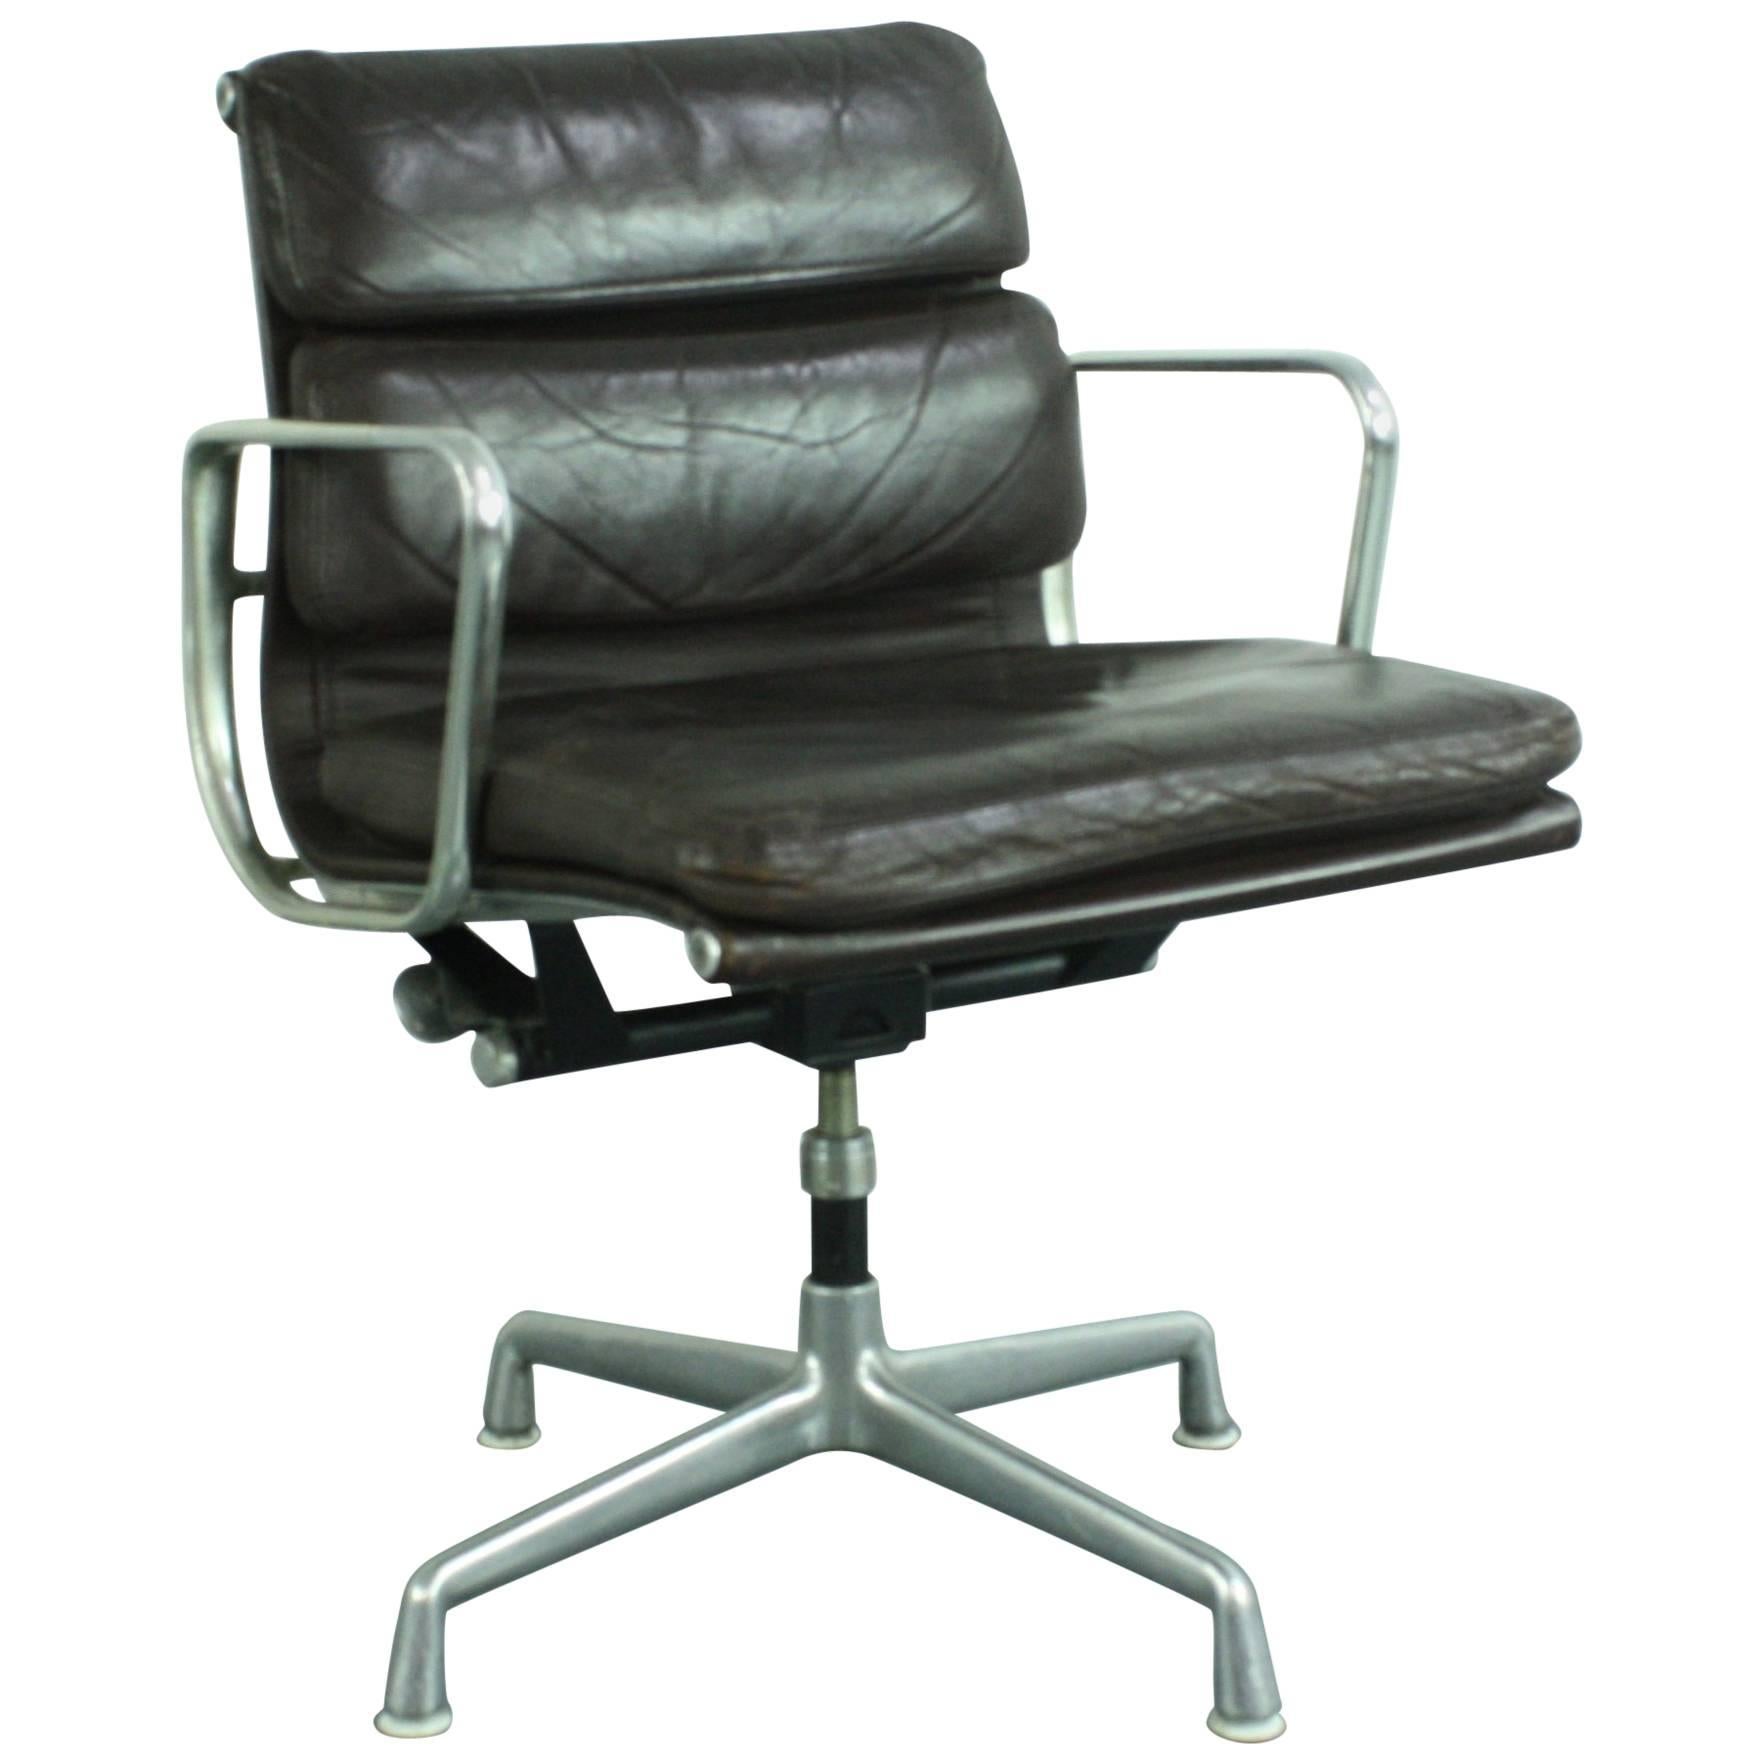 Eames Herman Miller Dark Brown Leather Soft Pad Group Chair For Sale